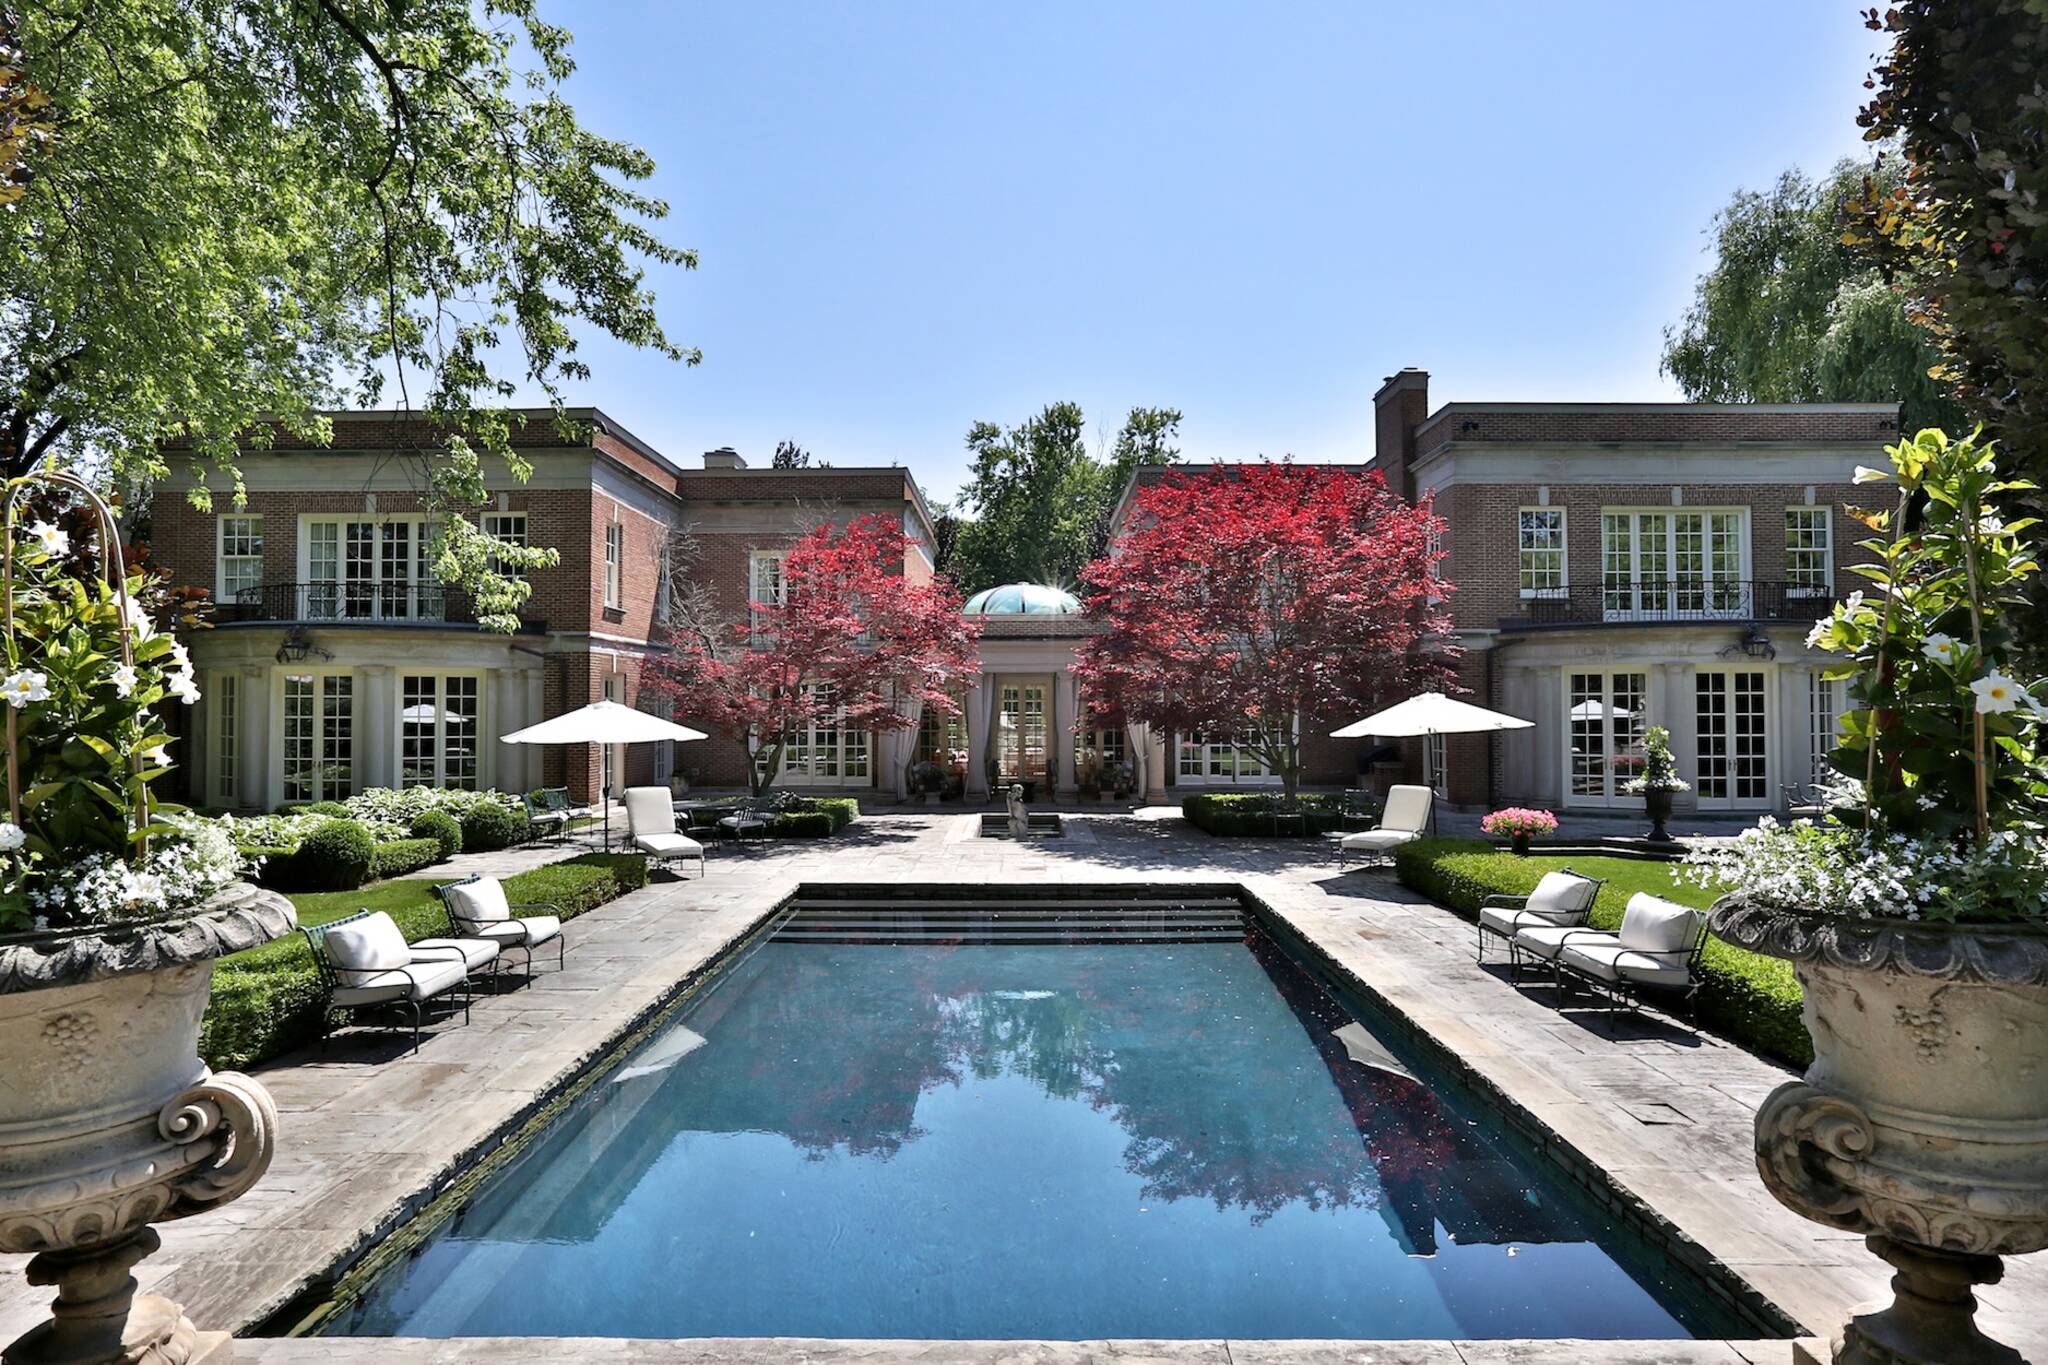 The 6 most expensive homes for sale in Toronto right now